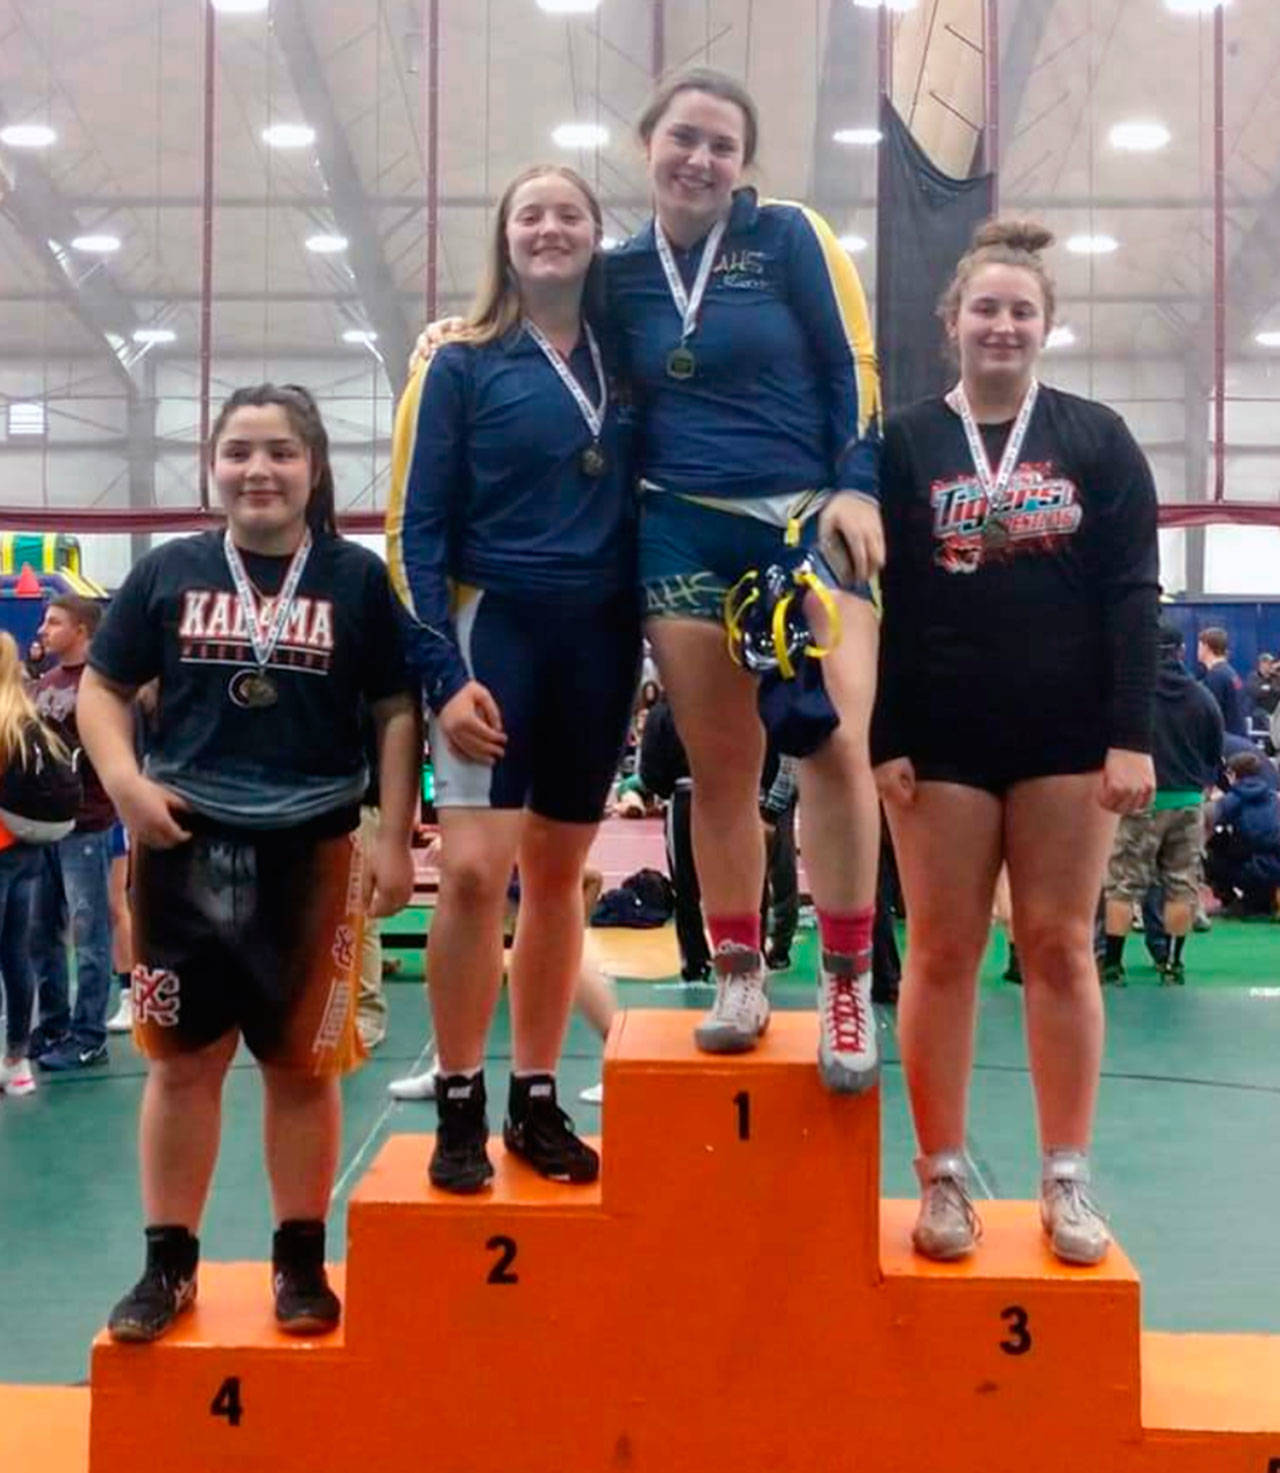 Aberdeen’s Tatum Heikkila (1) and Katie Gaskin (2) stand arm-in-arm atop the podium after finishing first and second, respectively, in the 190-pound class of the WIAA District IV North Sub-Regional Tournament at the Northwest Sports Hub in Centralia on Saturday. (Submitted photo)